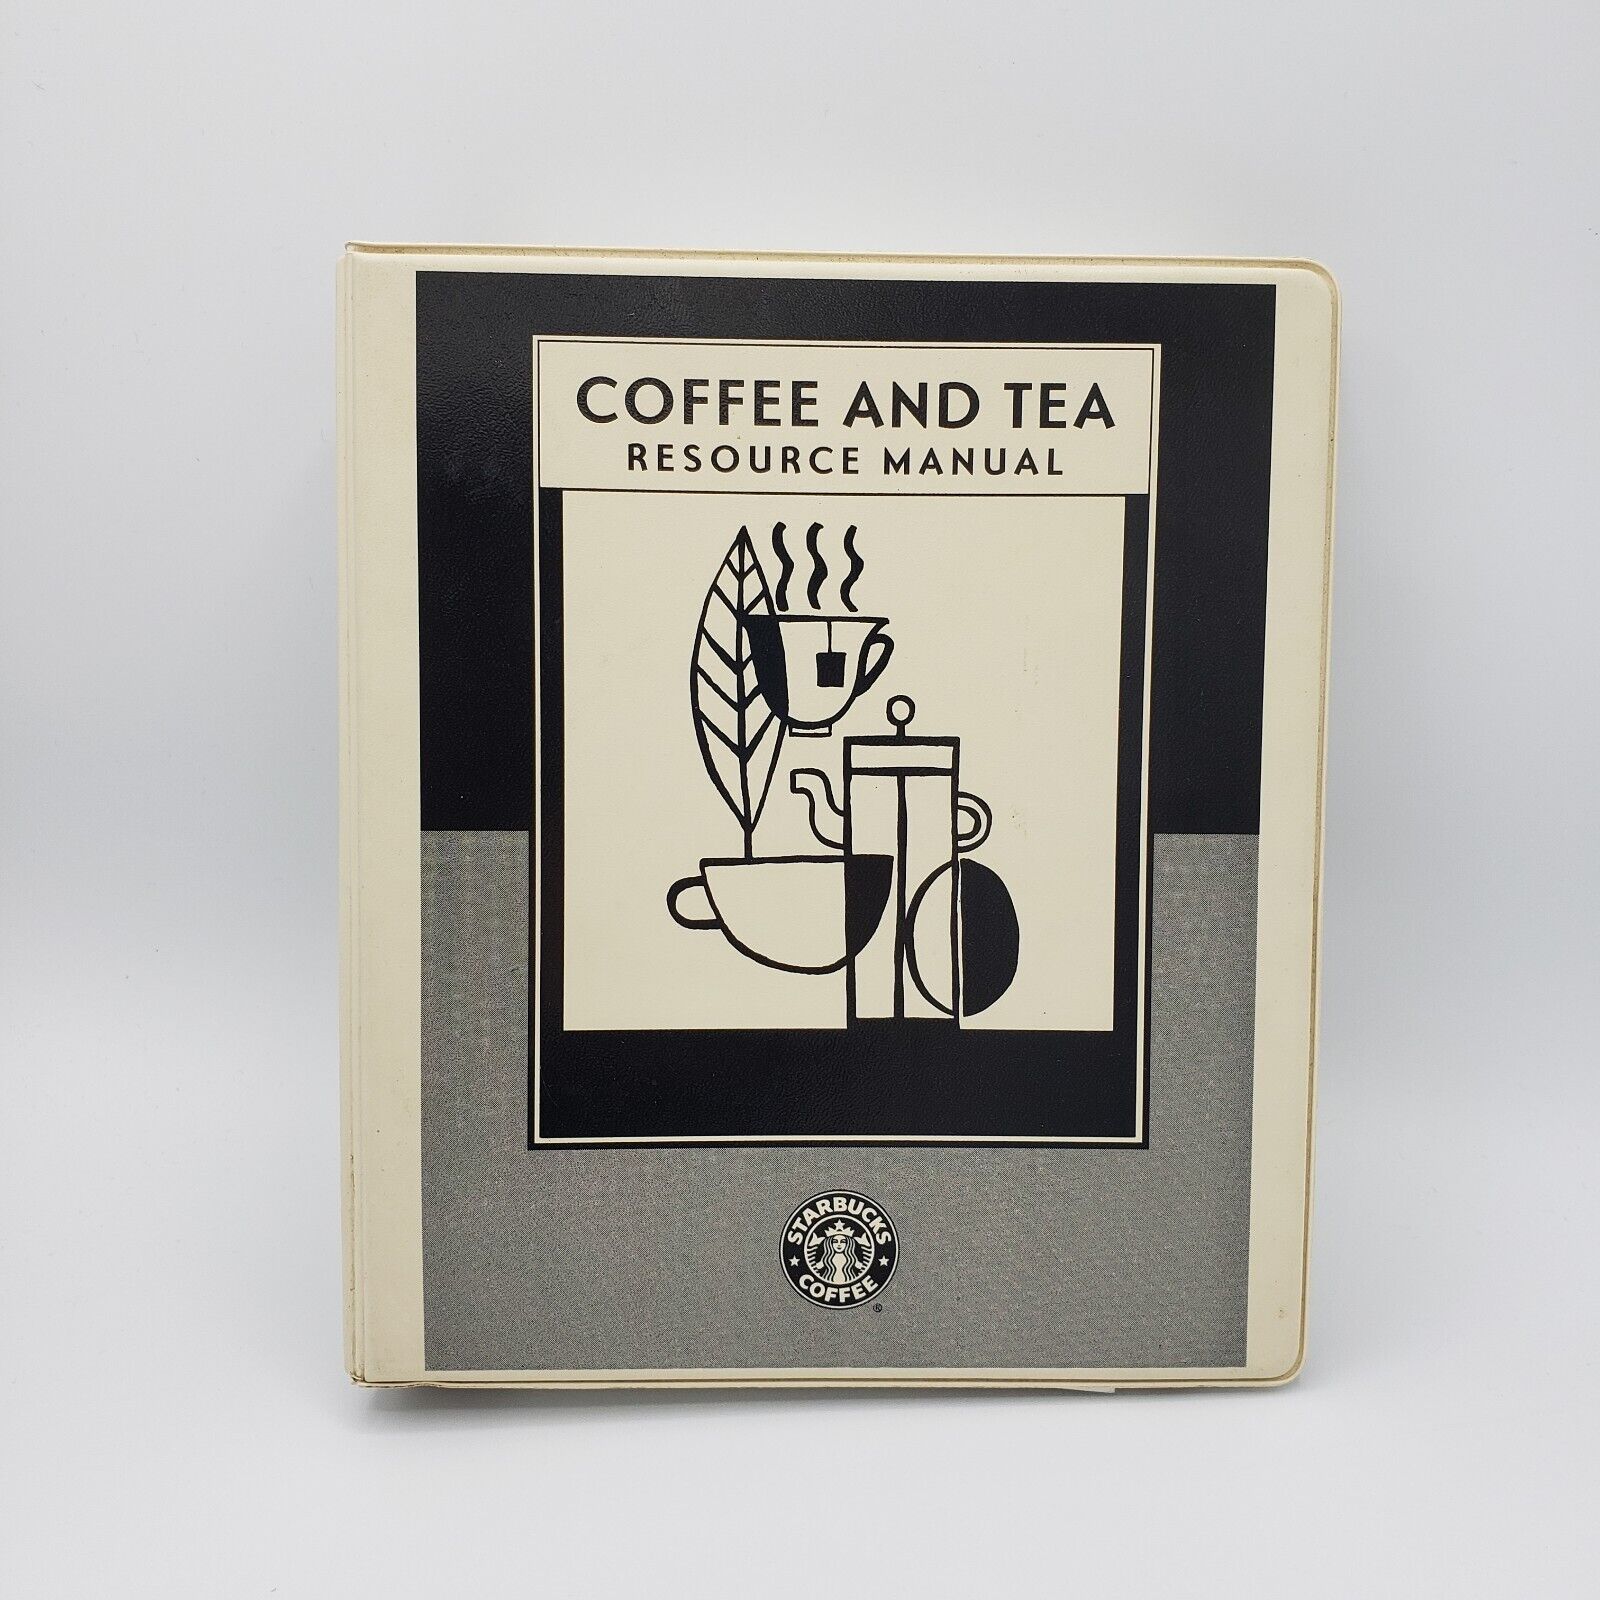 Extremely RARE Starbucks Store COFFEE AND TEA RESOURCE MANUAL, 2008